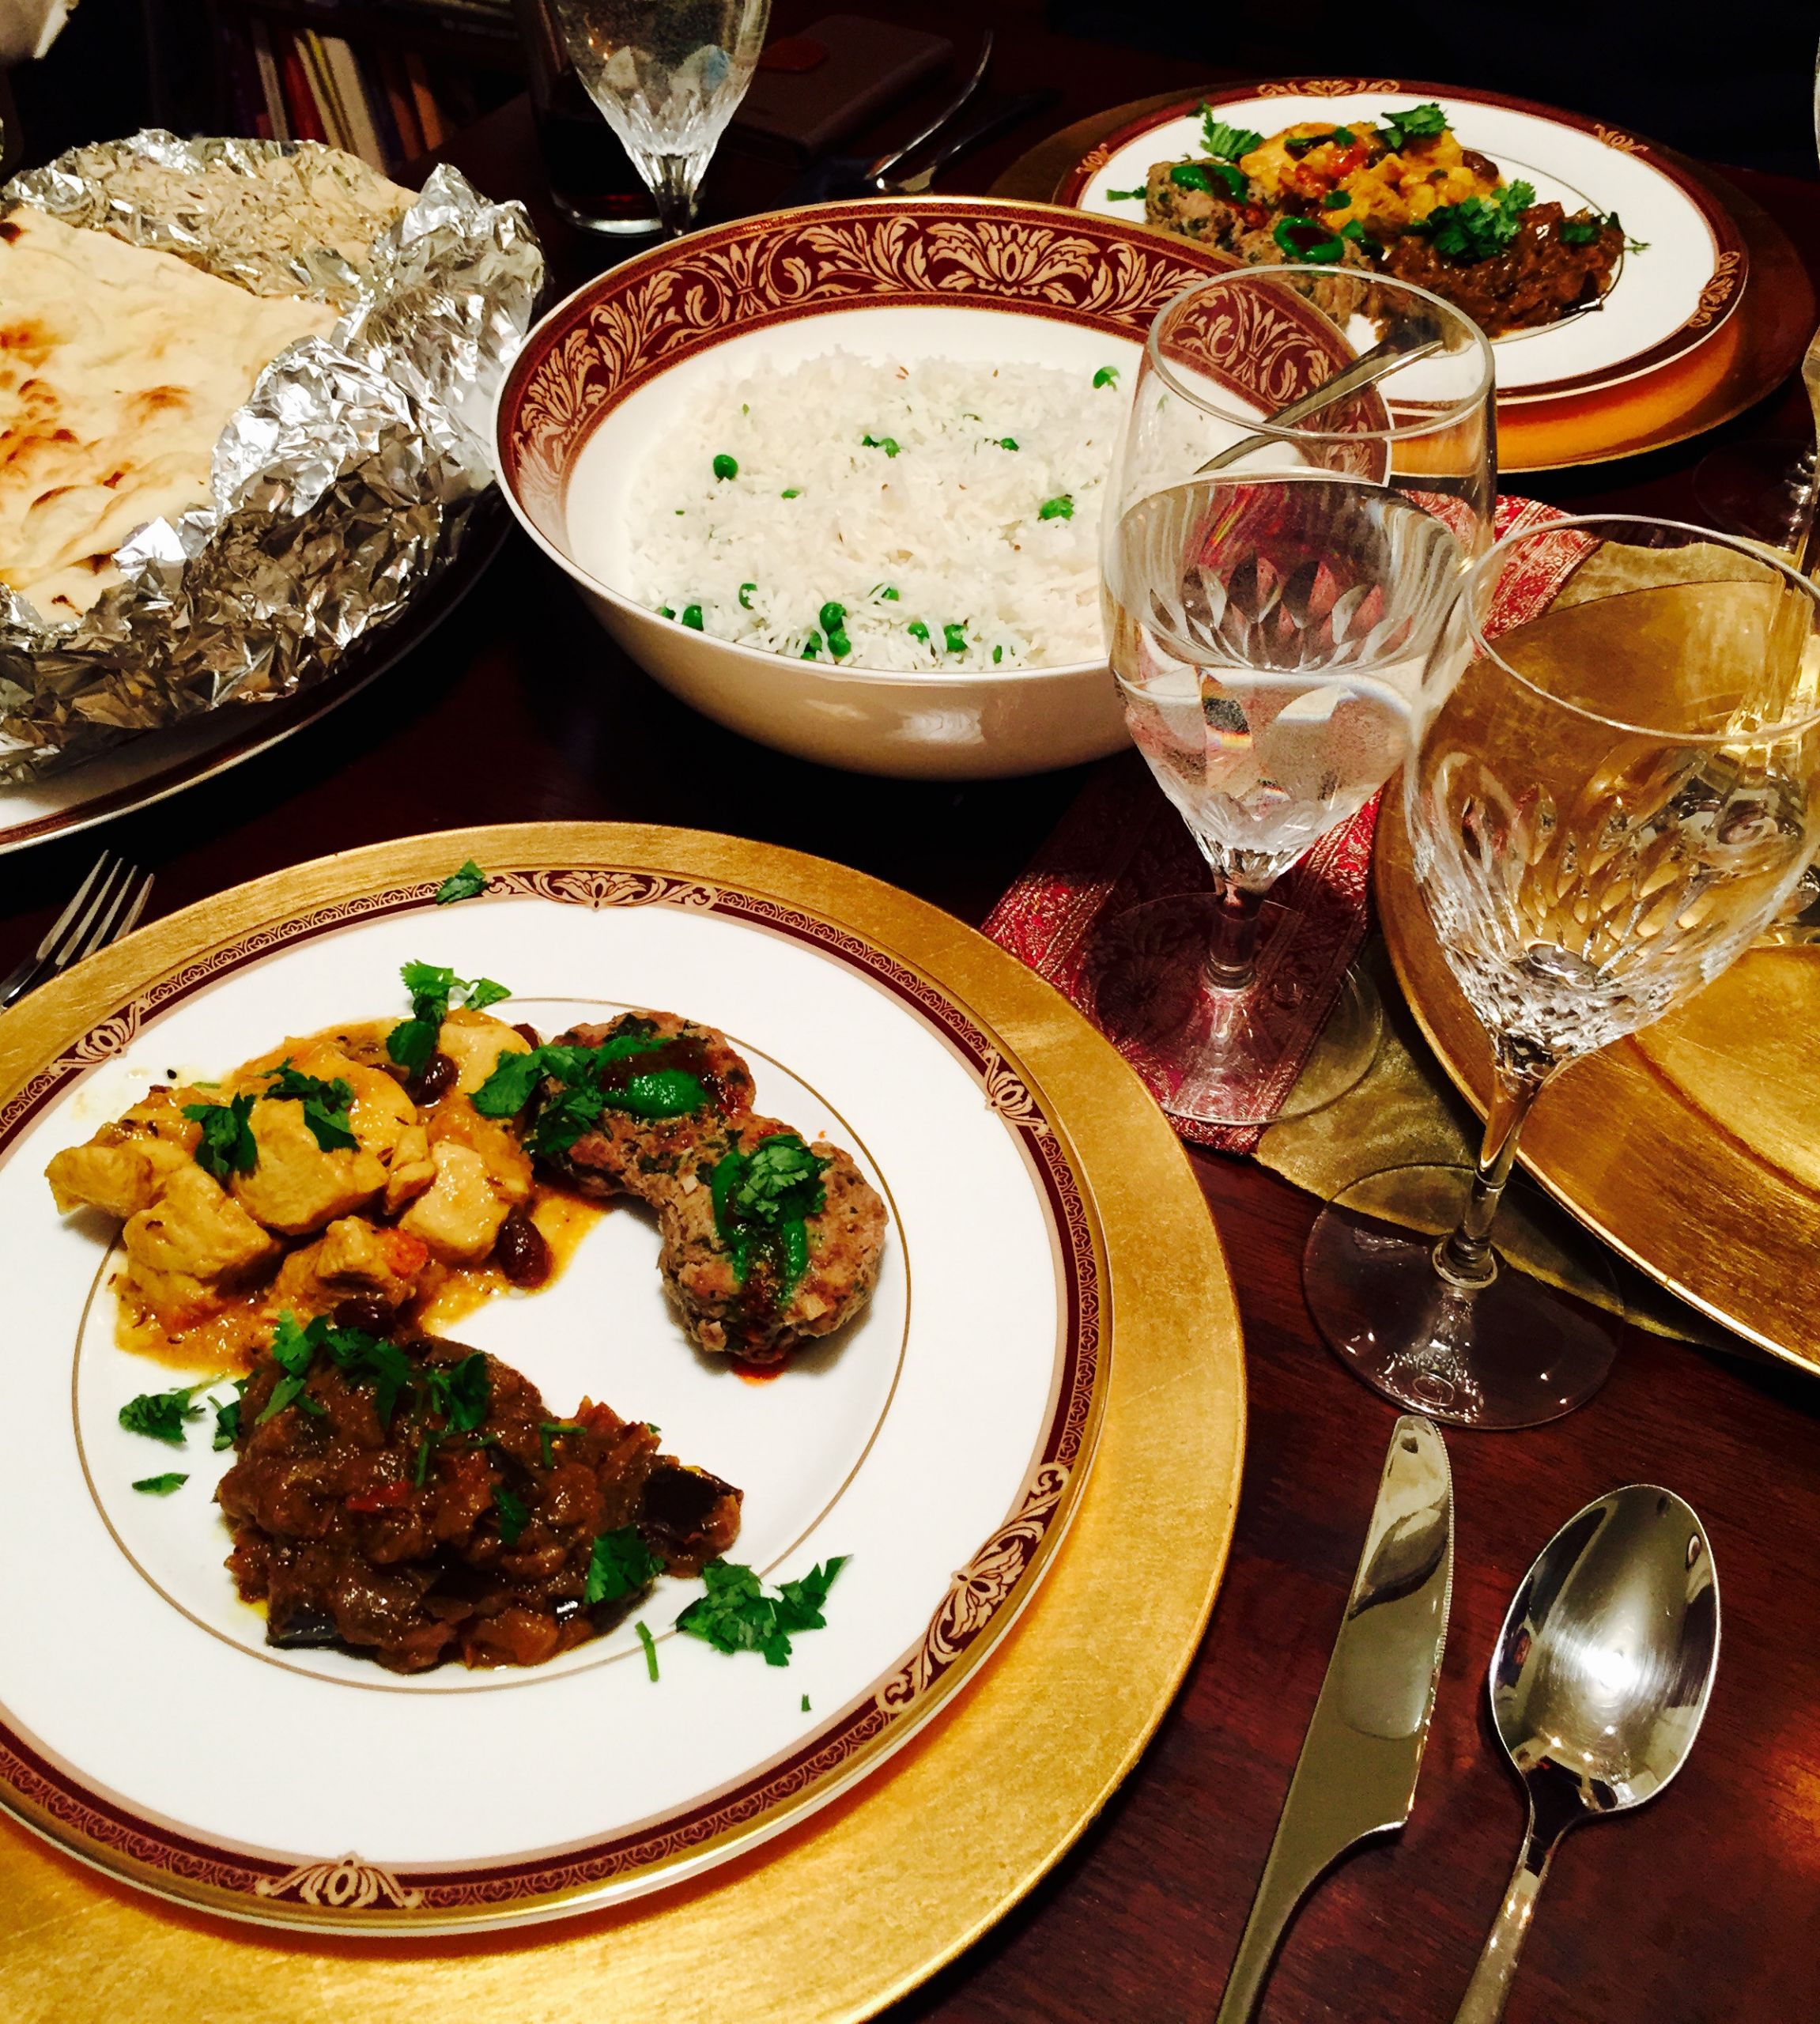 Large Party Dinner Ideas
 Hosting an Elegant Indian Dinner Party